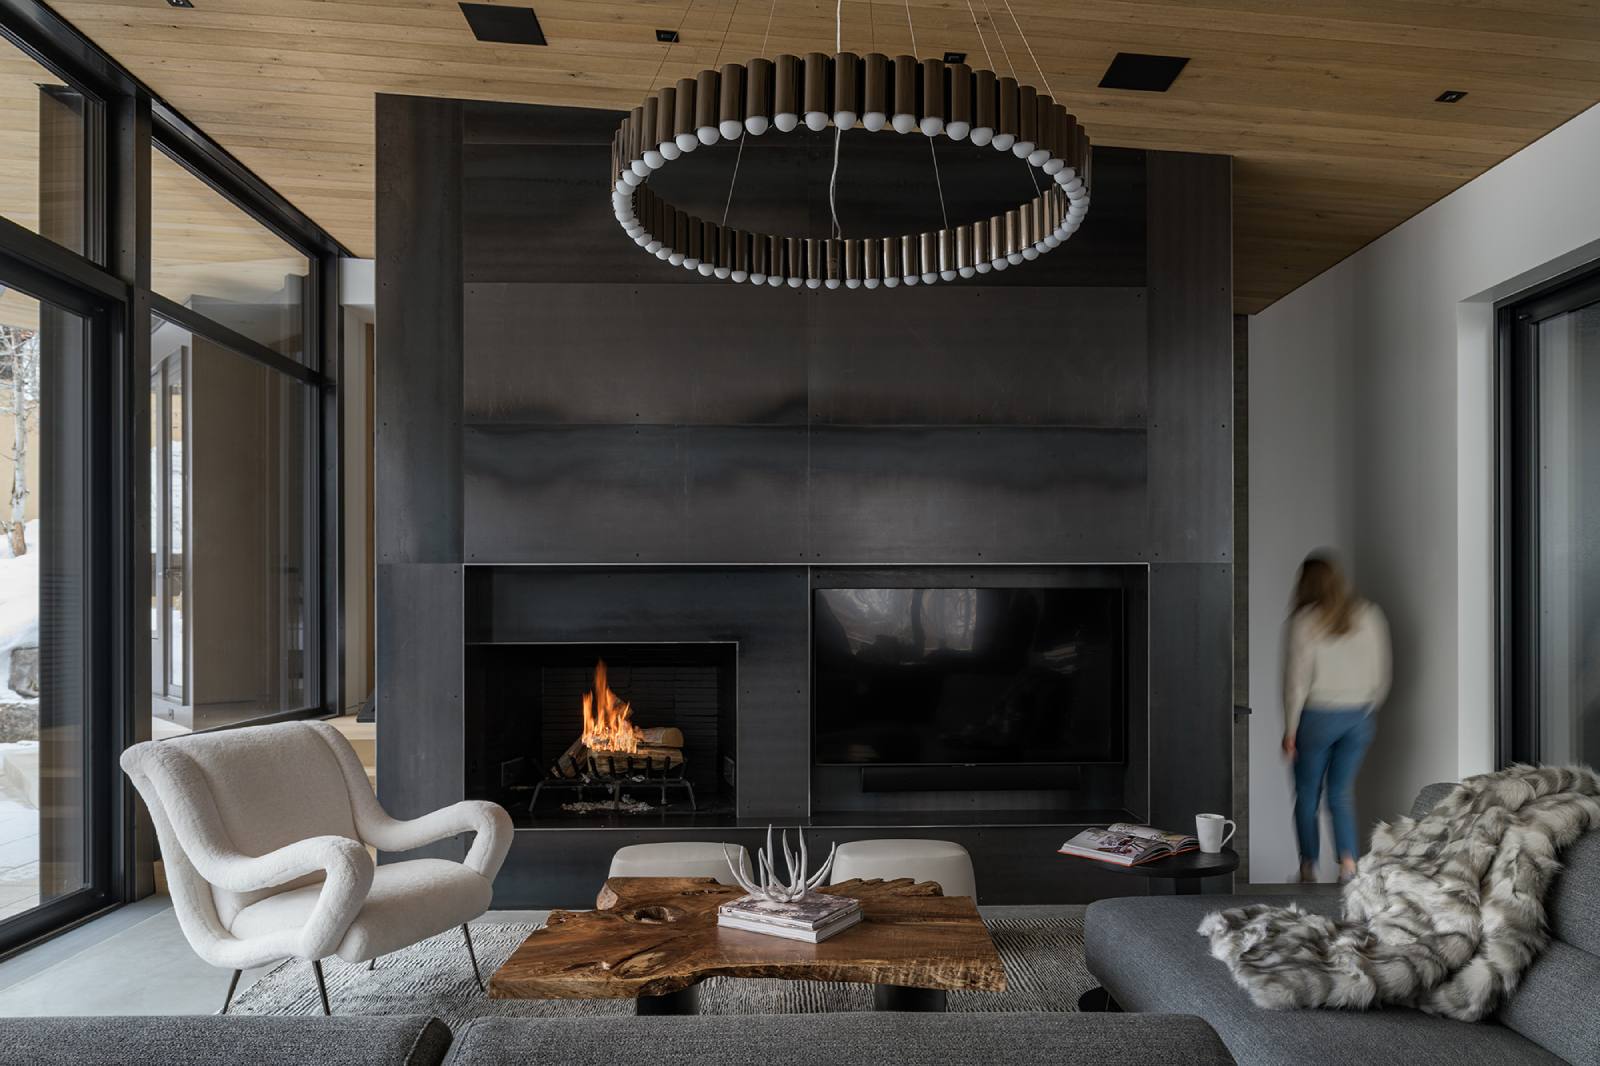 Interior view of the living room and fireplace at Avalanche Chalet, a custom home designed and built by Farmer Payne Architects.